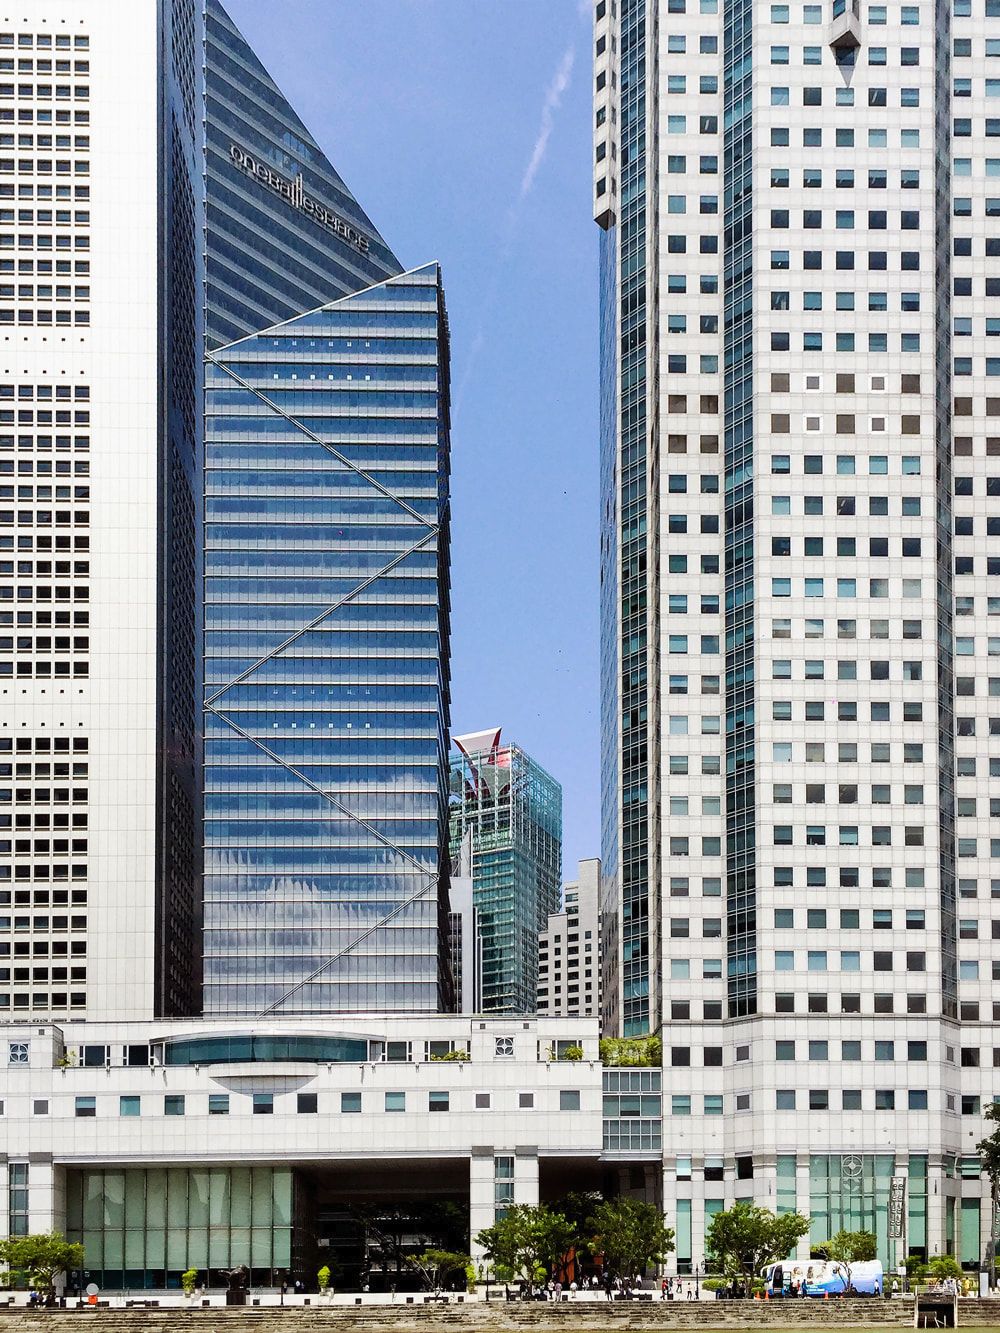 A close up of One Raffles place. The location of Singapore's tallest skyscraper, UOB Plaza One.